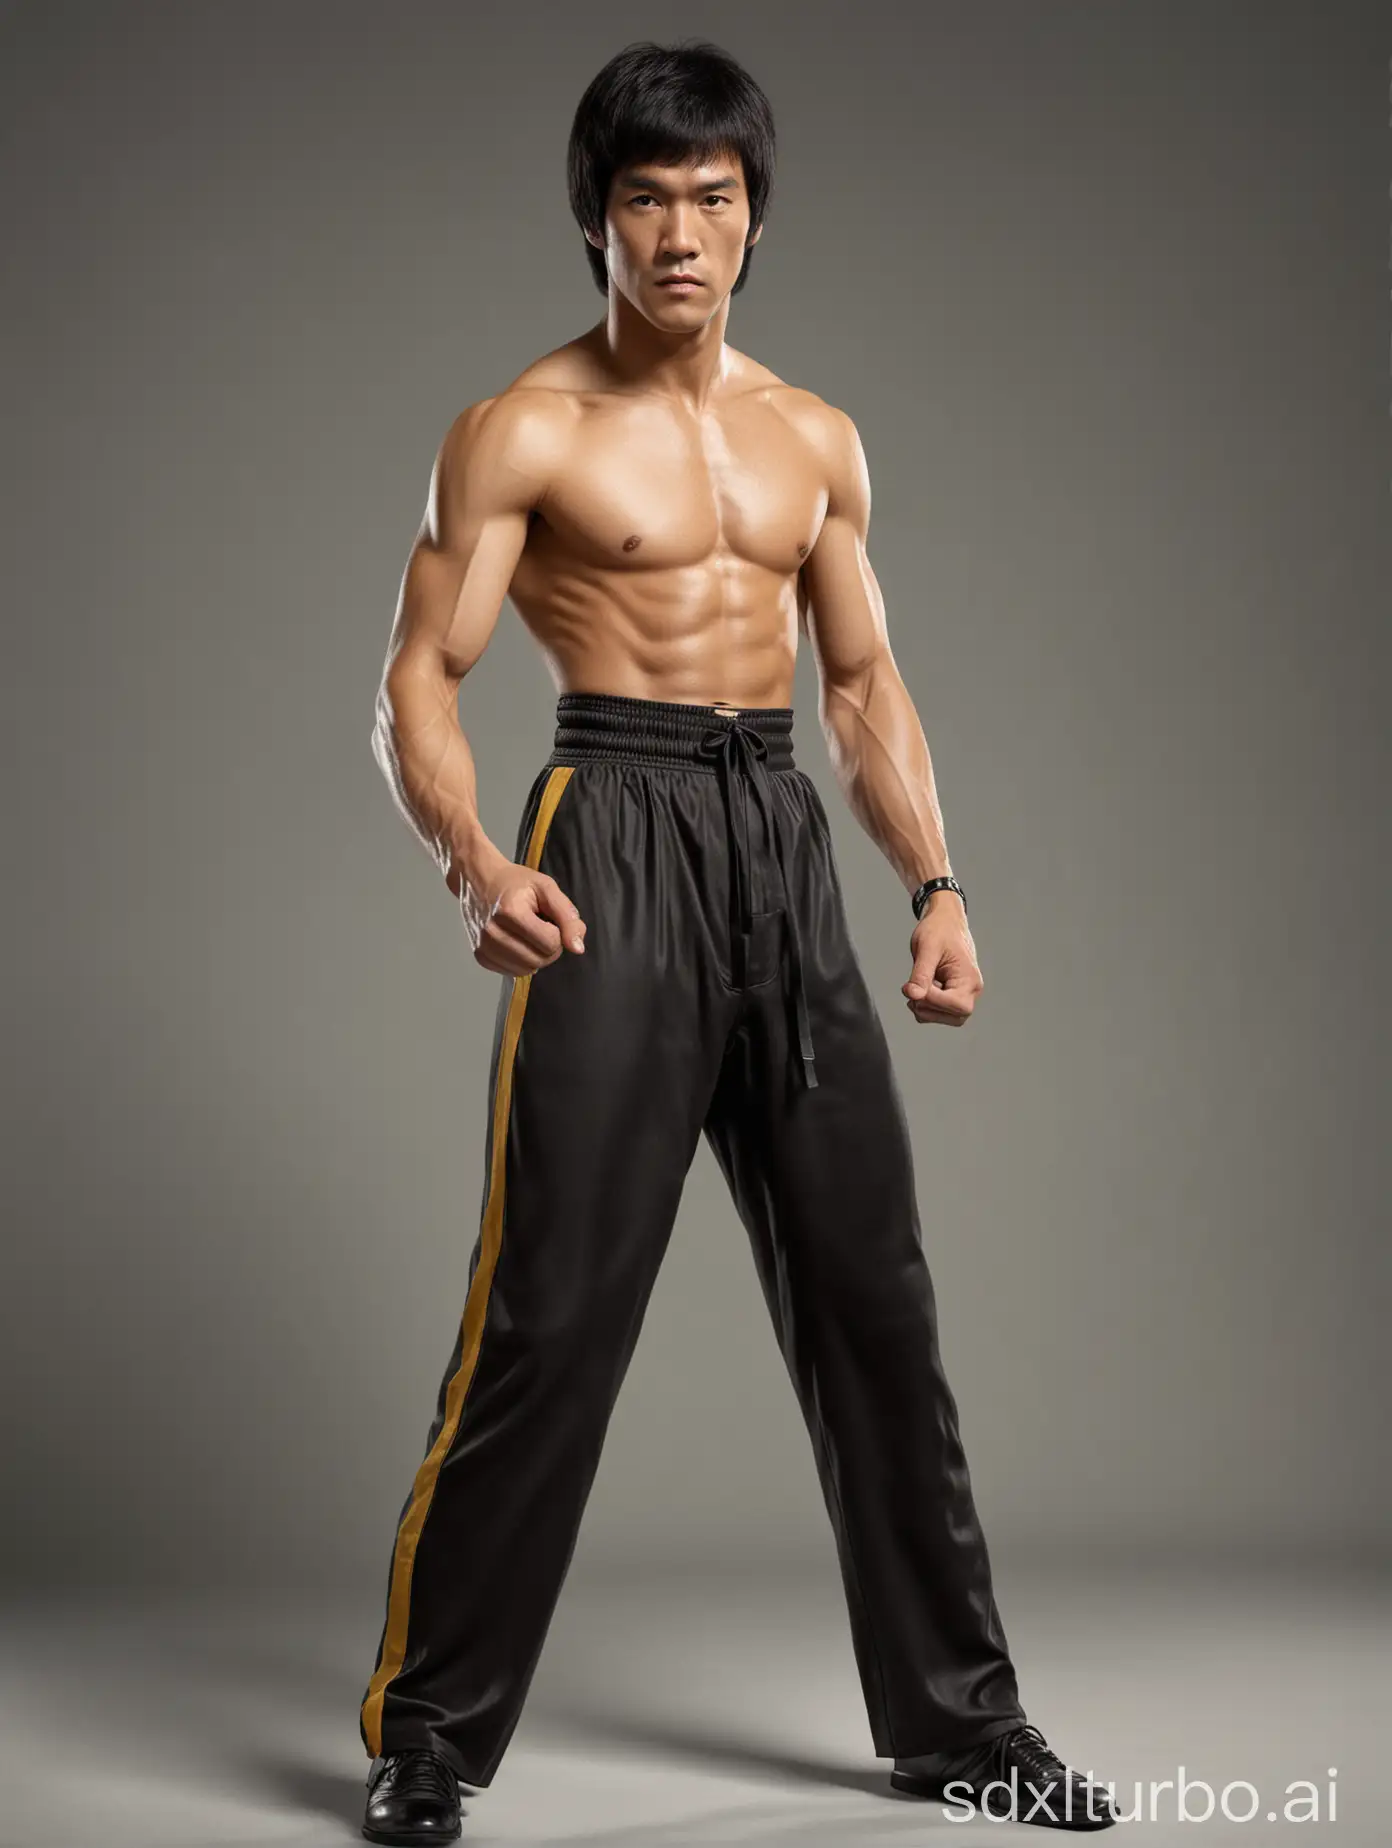 Bruce lee in a full body portrait. This is a photo realistic high resolution image with sharp clean subject focus